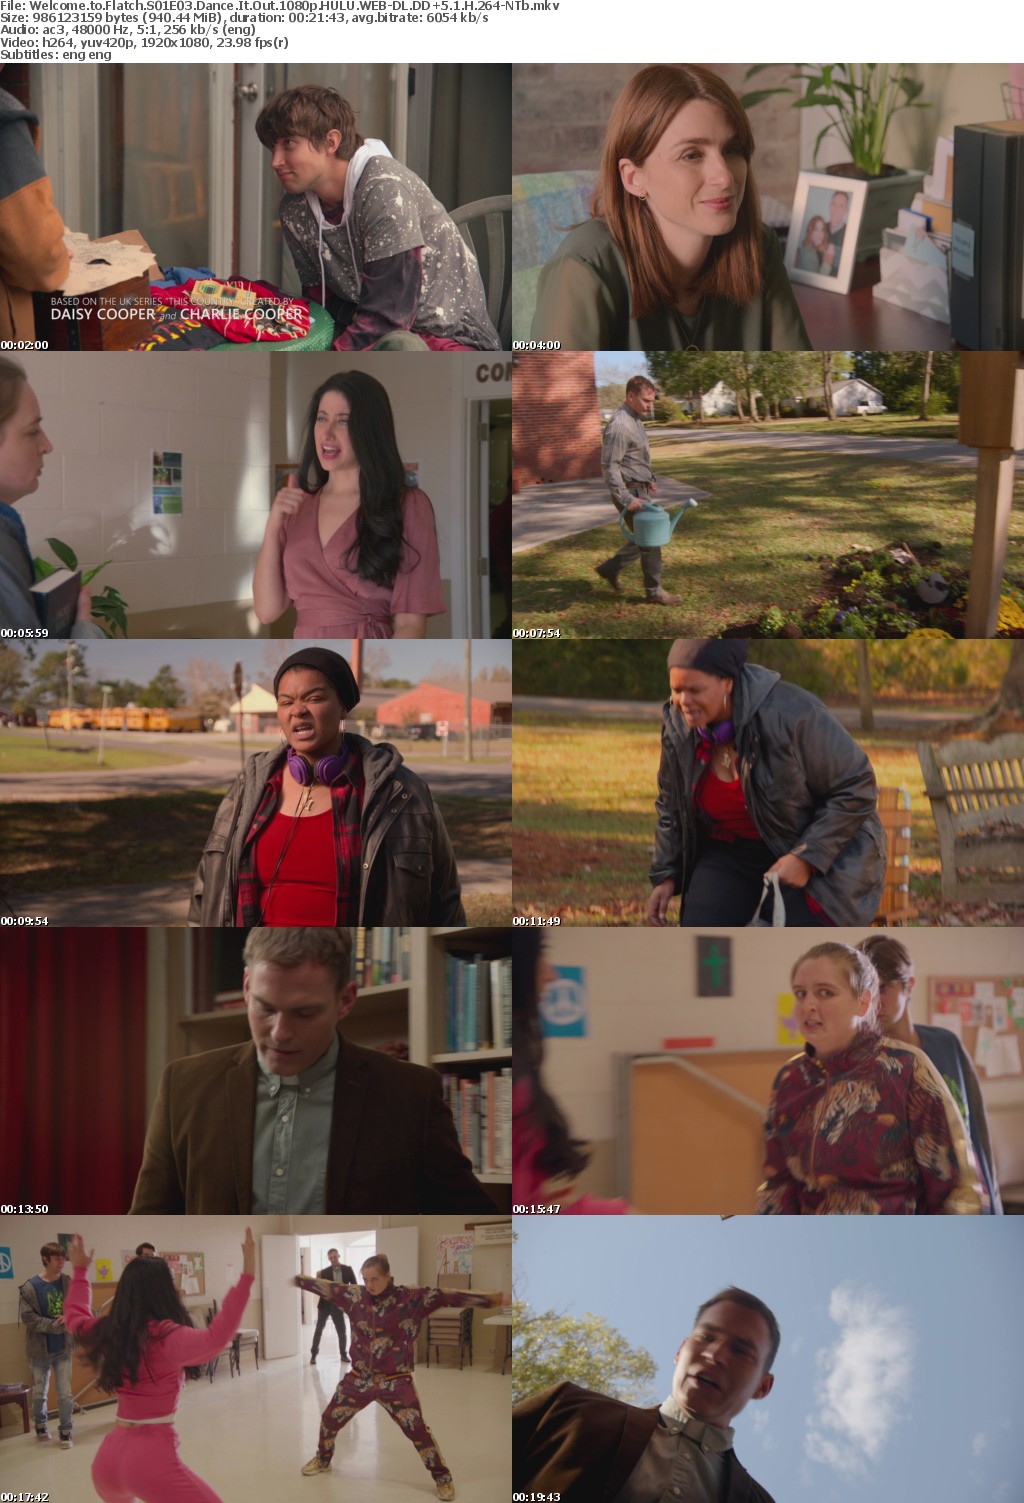 Welcome to Flatch S01E03 Dance It Out 1080p HULU WEBRip DDP5 1 x264-NTb